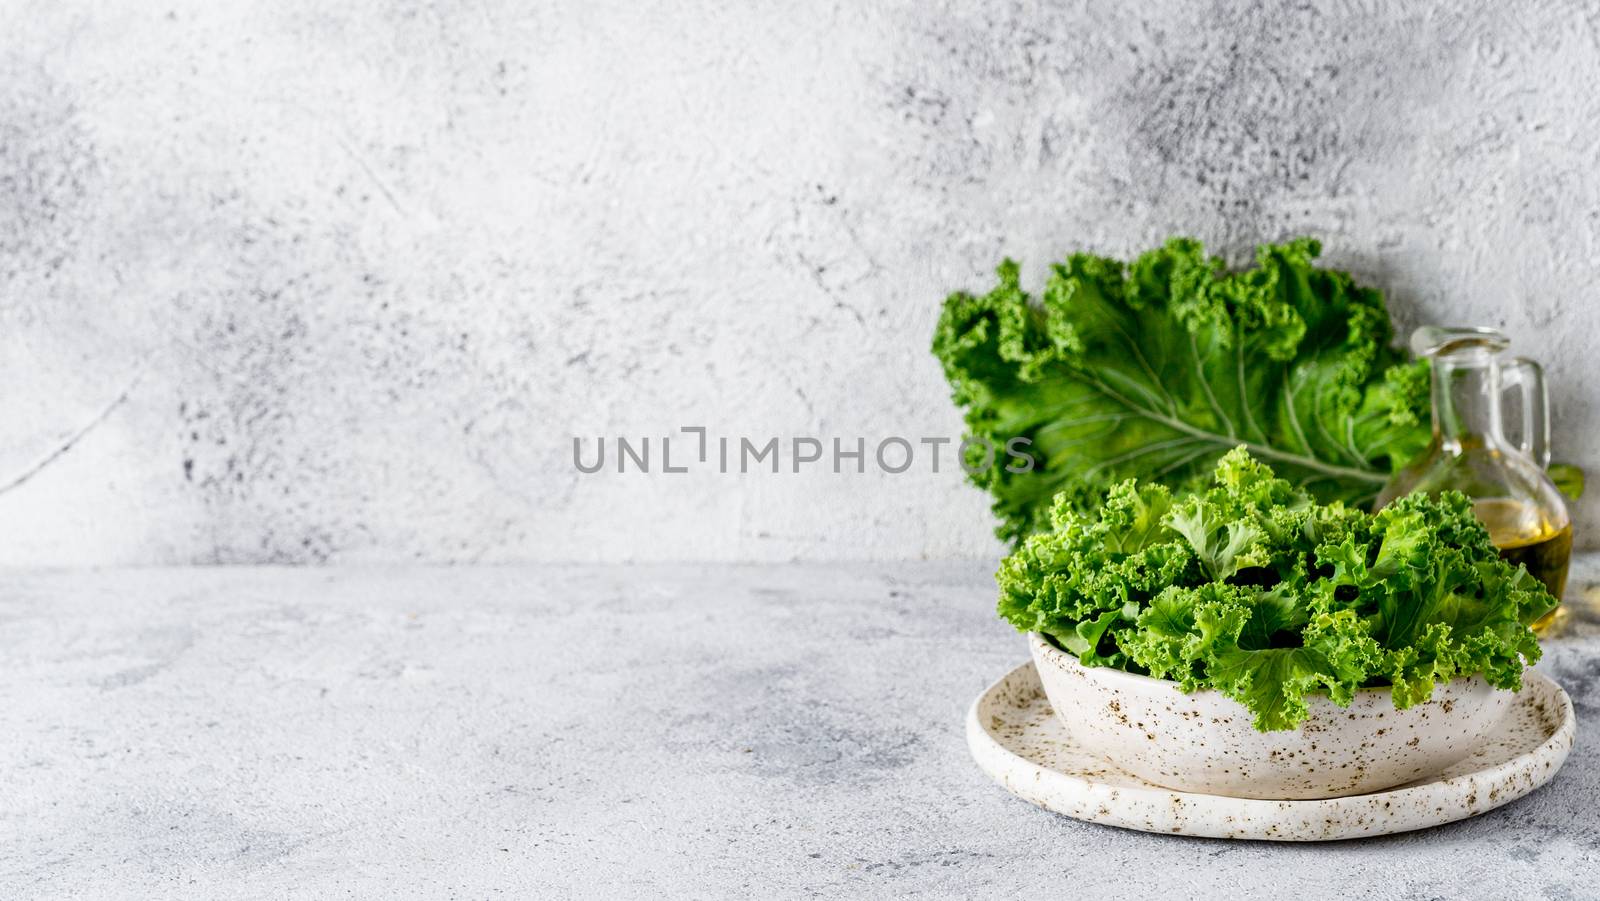 Green kale leaves in white craft bowl on gray cement background. Healthy eating, vegetarian food, dieting concept. Copy space left. Health kale benefits. Banner